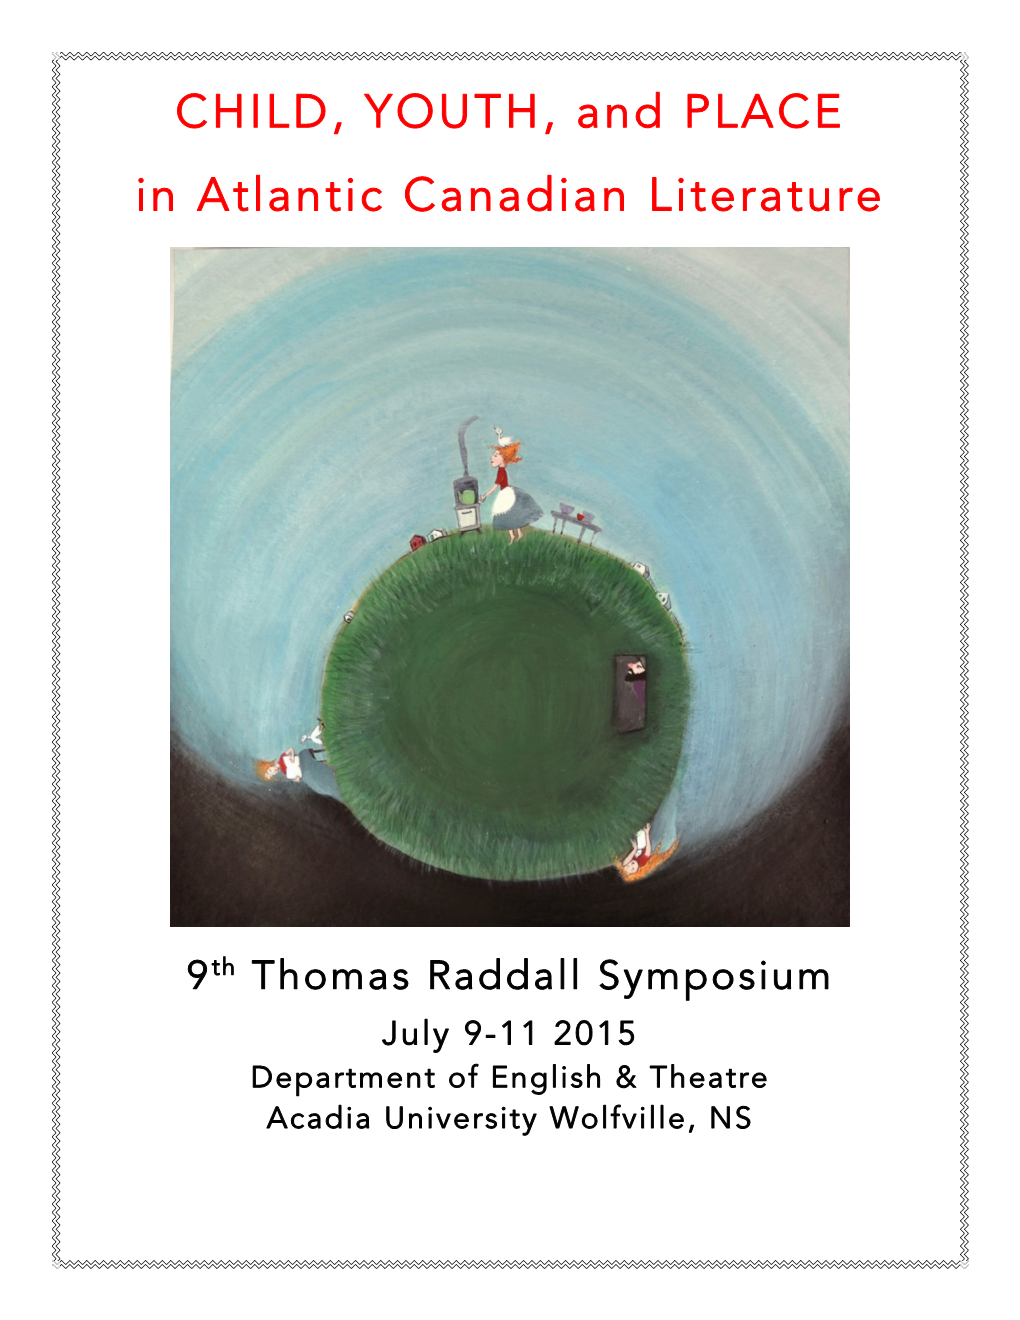 CHILD, YOUTH, and PLACE in Atlantic Canadian Literature